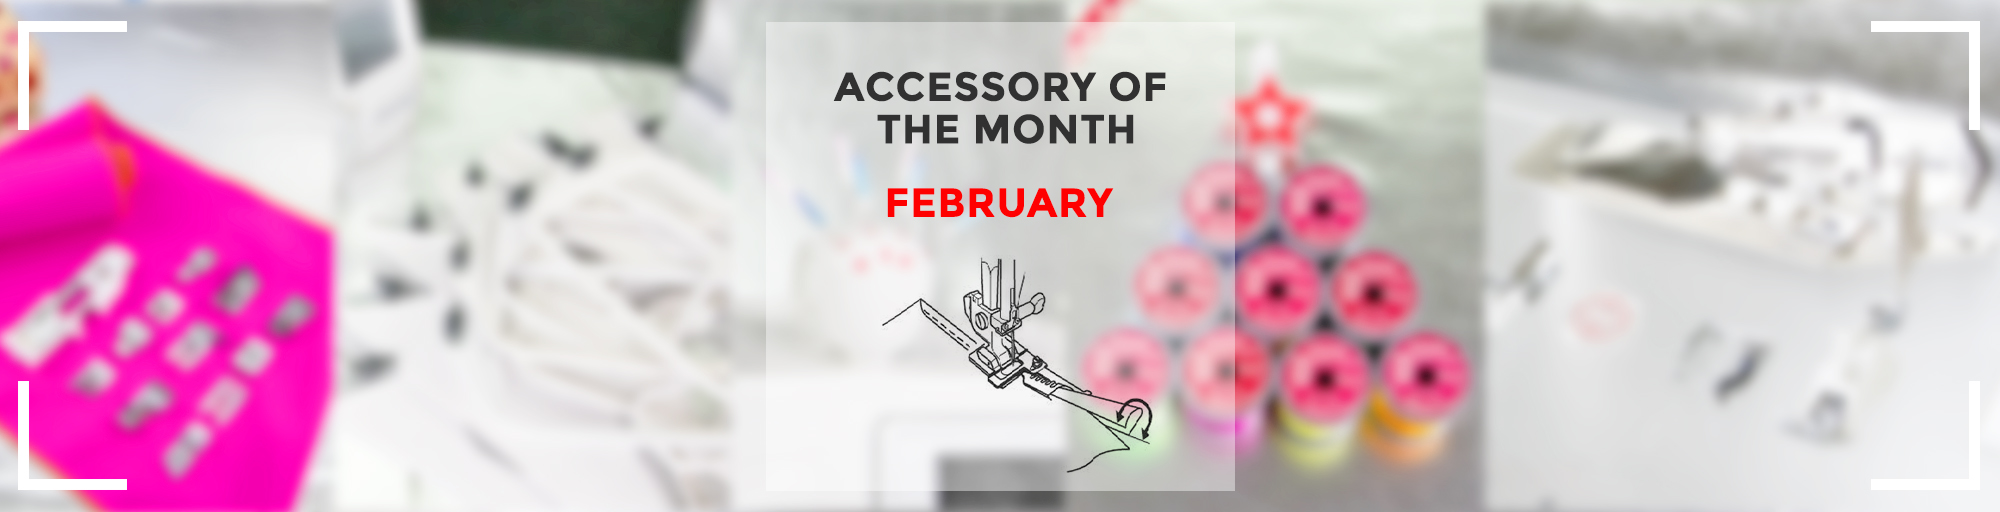 Accessory of the month feb